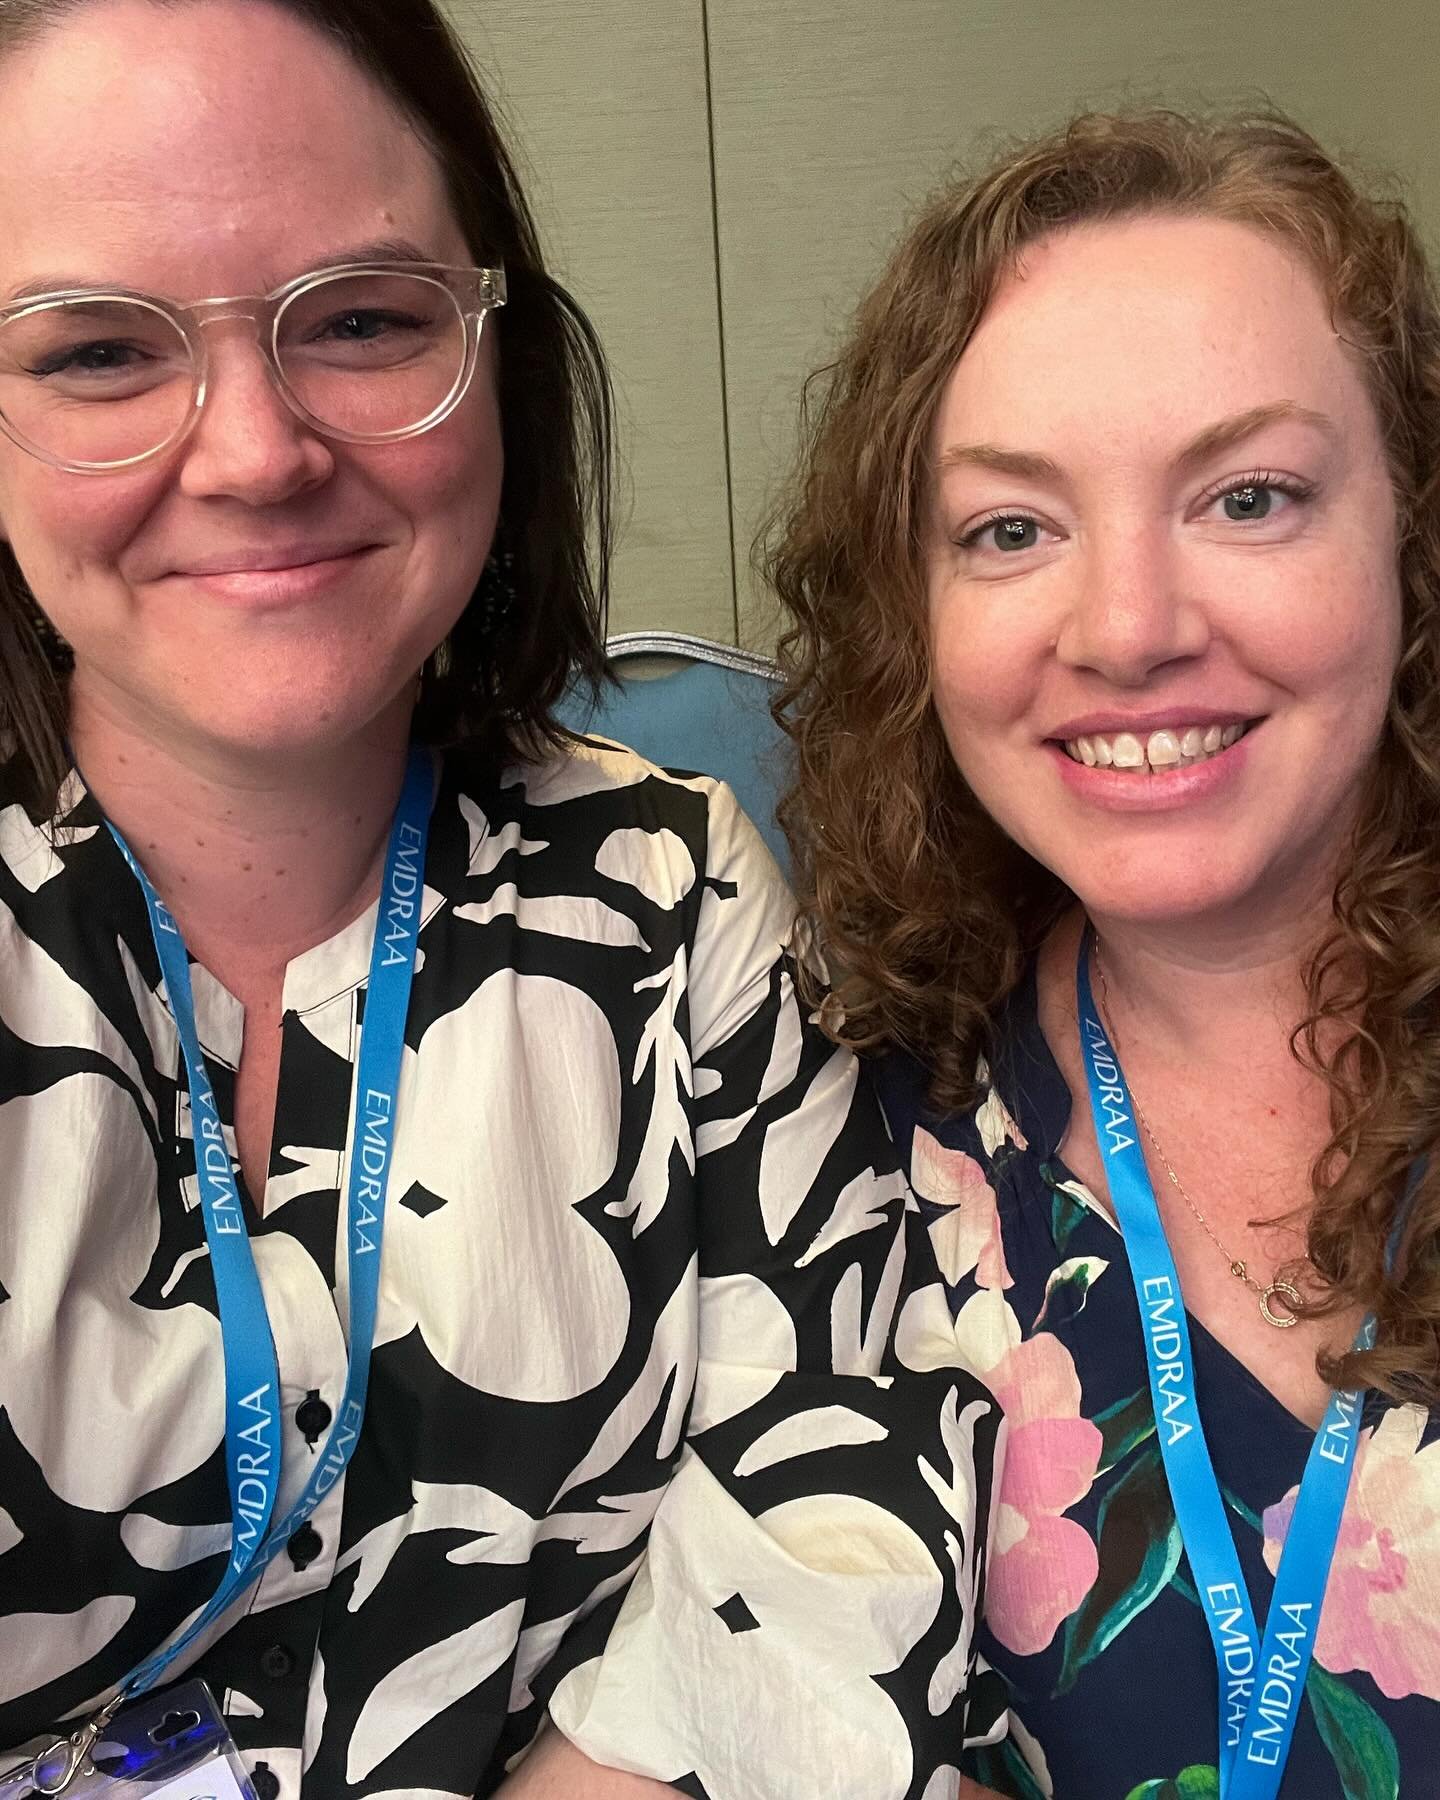 Two very happy EMDR therapists on our team - Lauren and Elissa - attending the @emdraustralia conference on the Gold Coast this weekend. 

Brilliant and heart felt clinicians have presented on this years theme of using EMDR for more than just PTSD. W